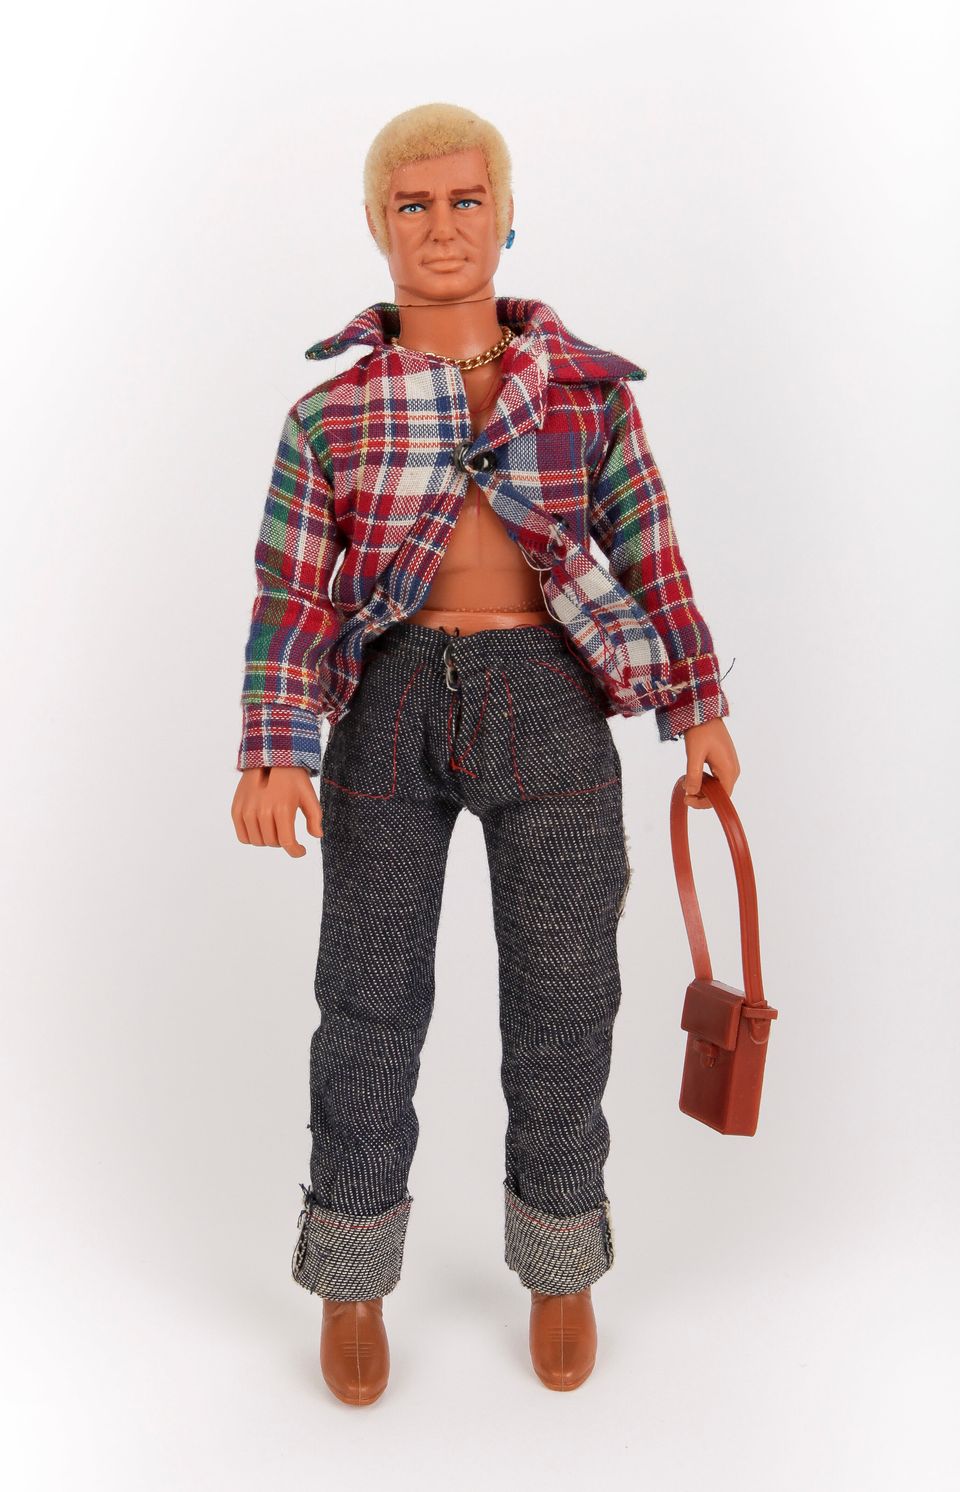 Meet Gay Bob The Worlds First Gay Doll Nsfw Huffpost Uk Queer 